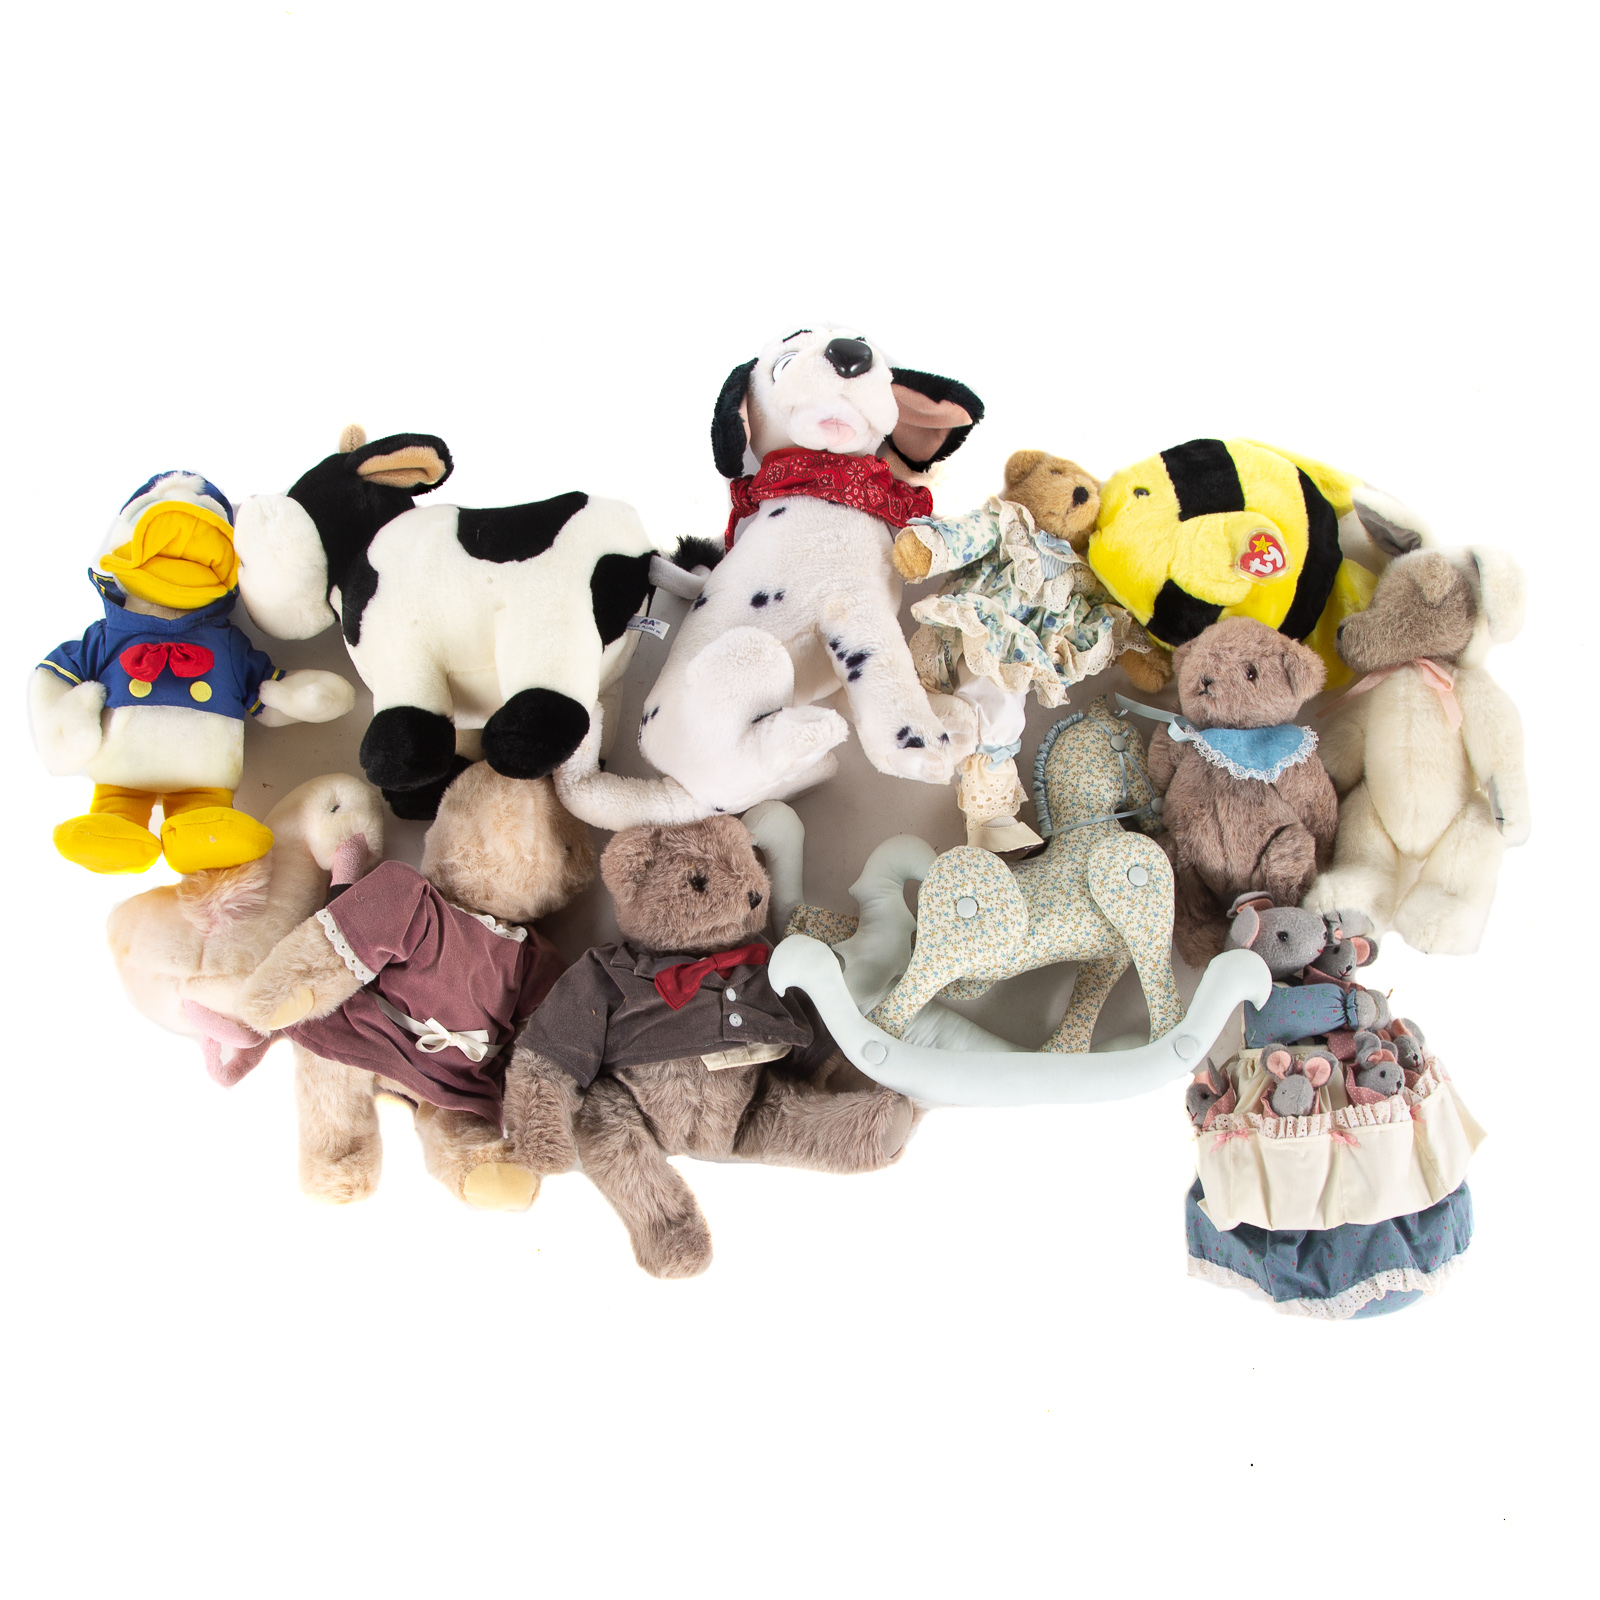 BOX OF ASSORTED STUFFED ANIMALS Includes